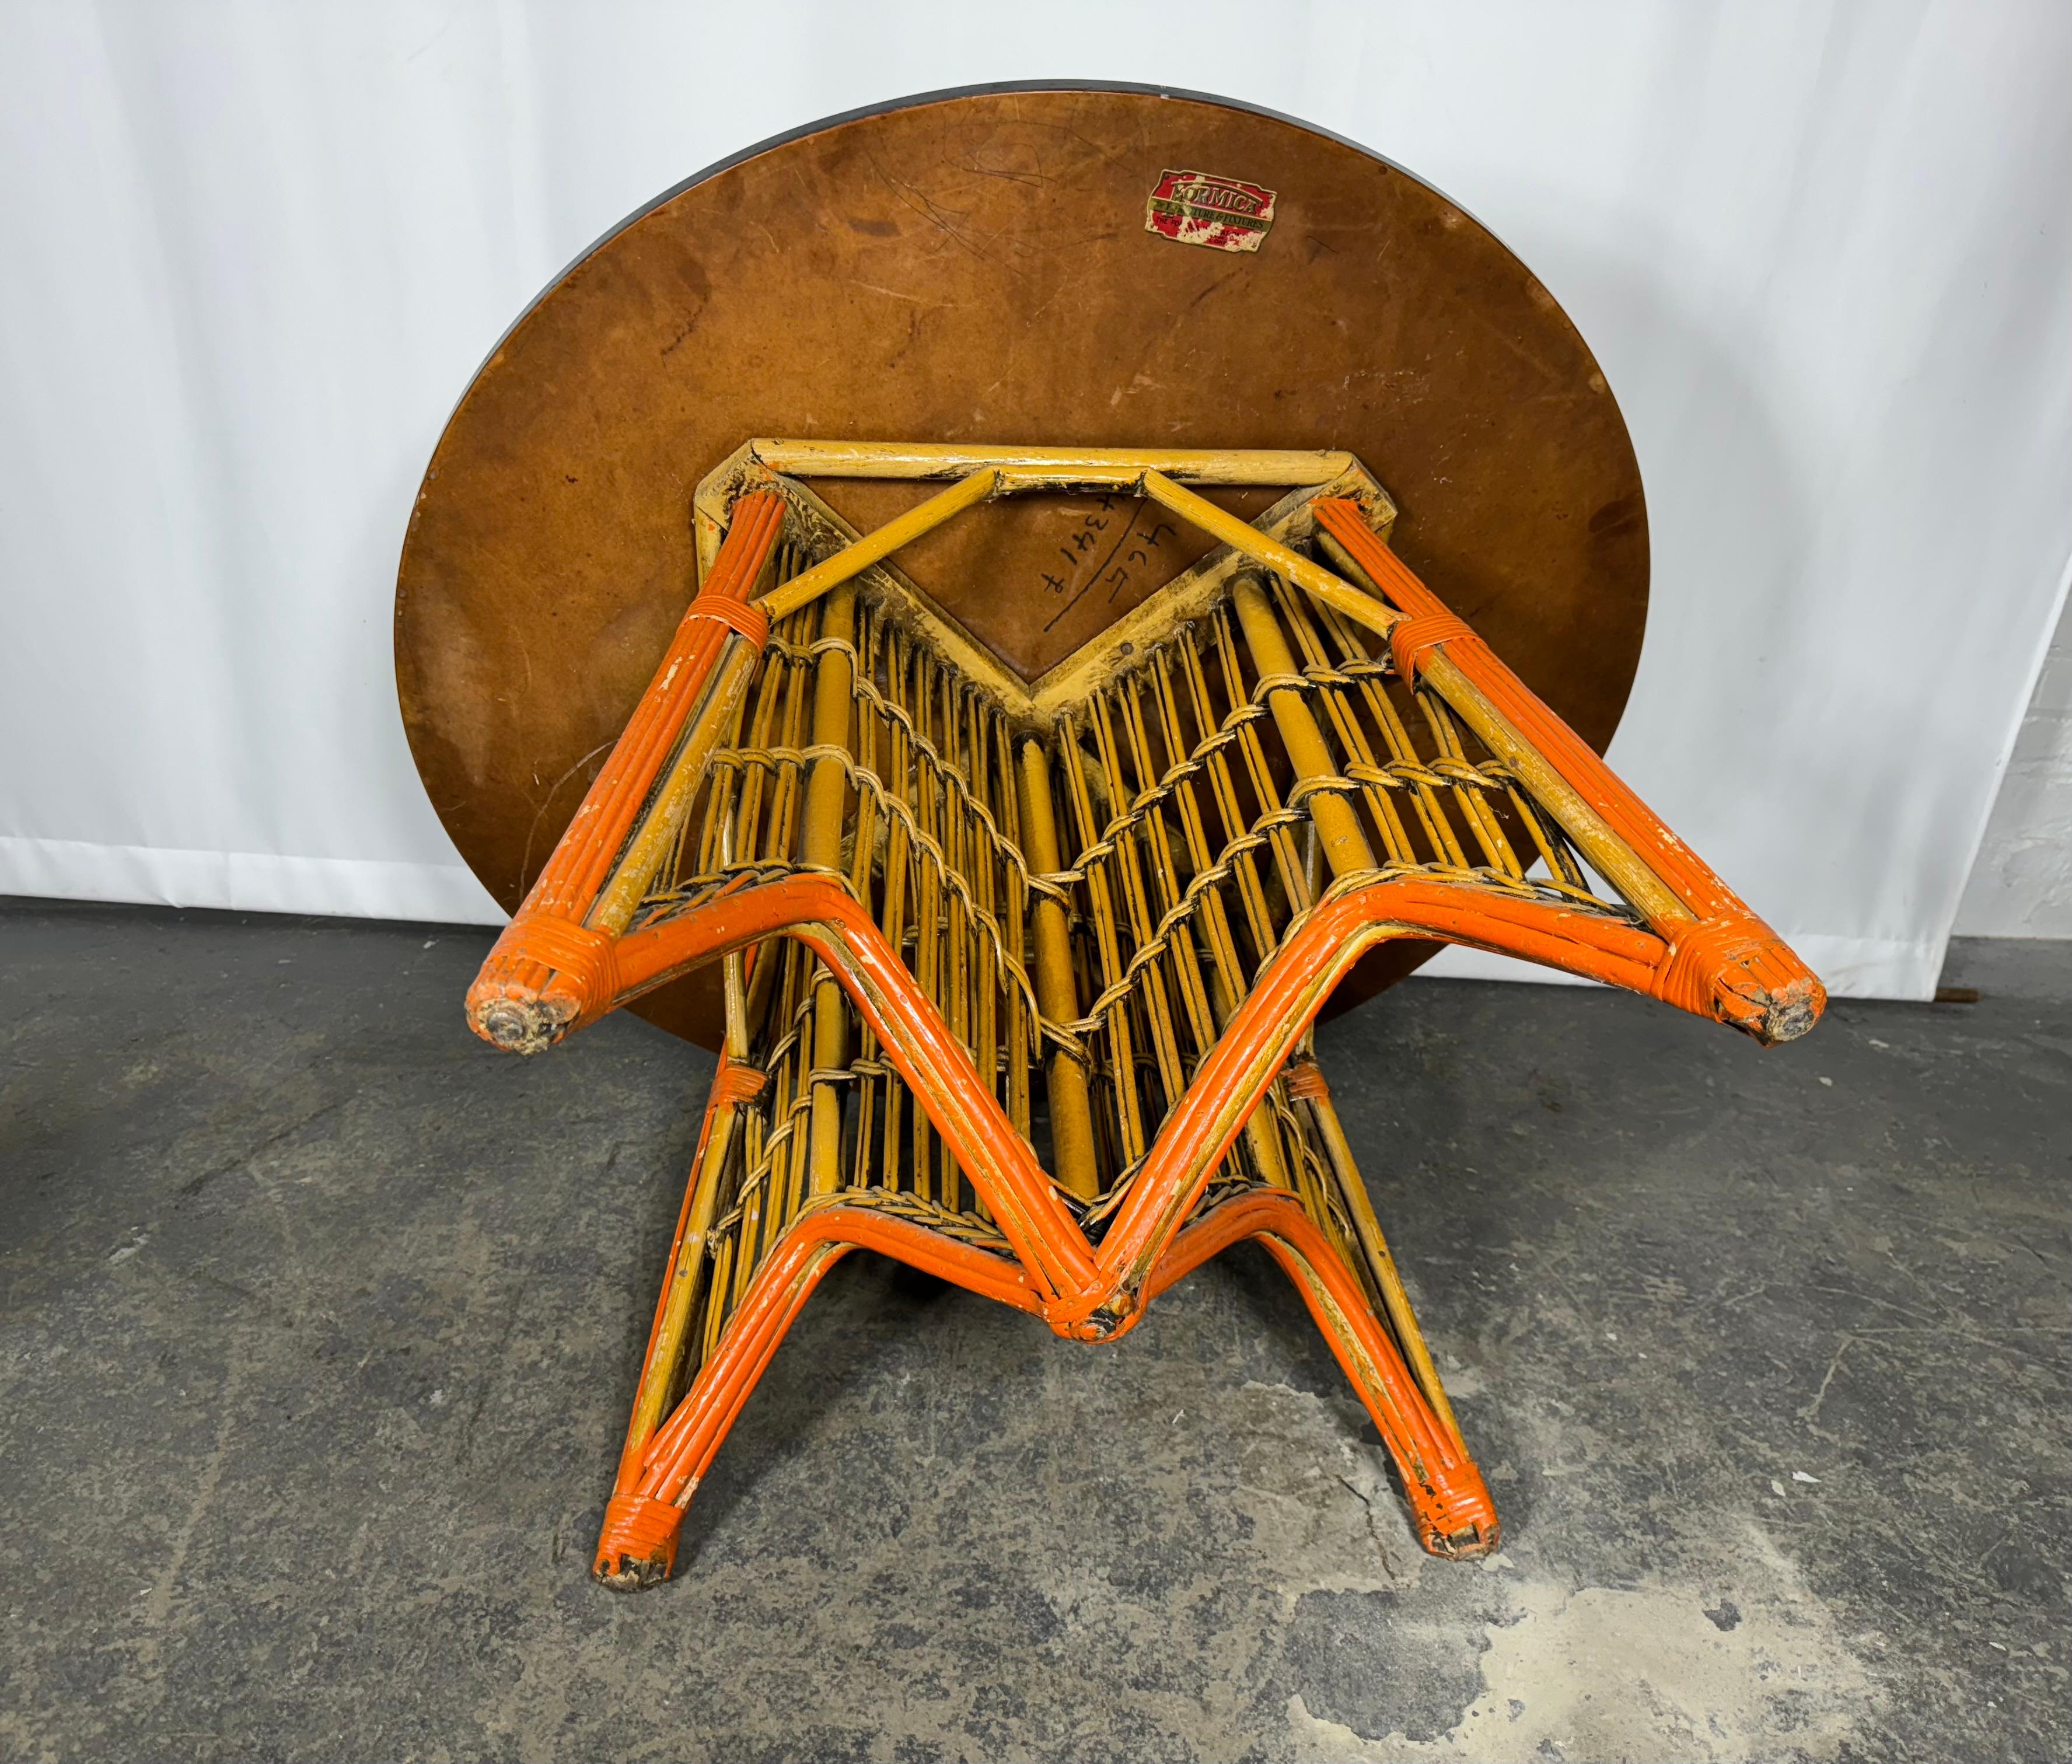 Stunning 1930's Art Deco  Stick wICKER / Split Reed Center / Cocktail Table, Ypsilanti,, Amazing quality and construction,, Wonderful design / patina. Great color.. (possibly repainted a very long time ago) Retains original black laminate / formica